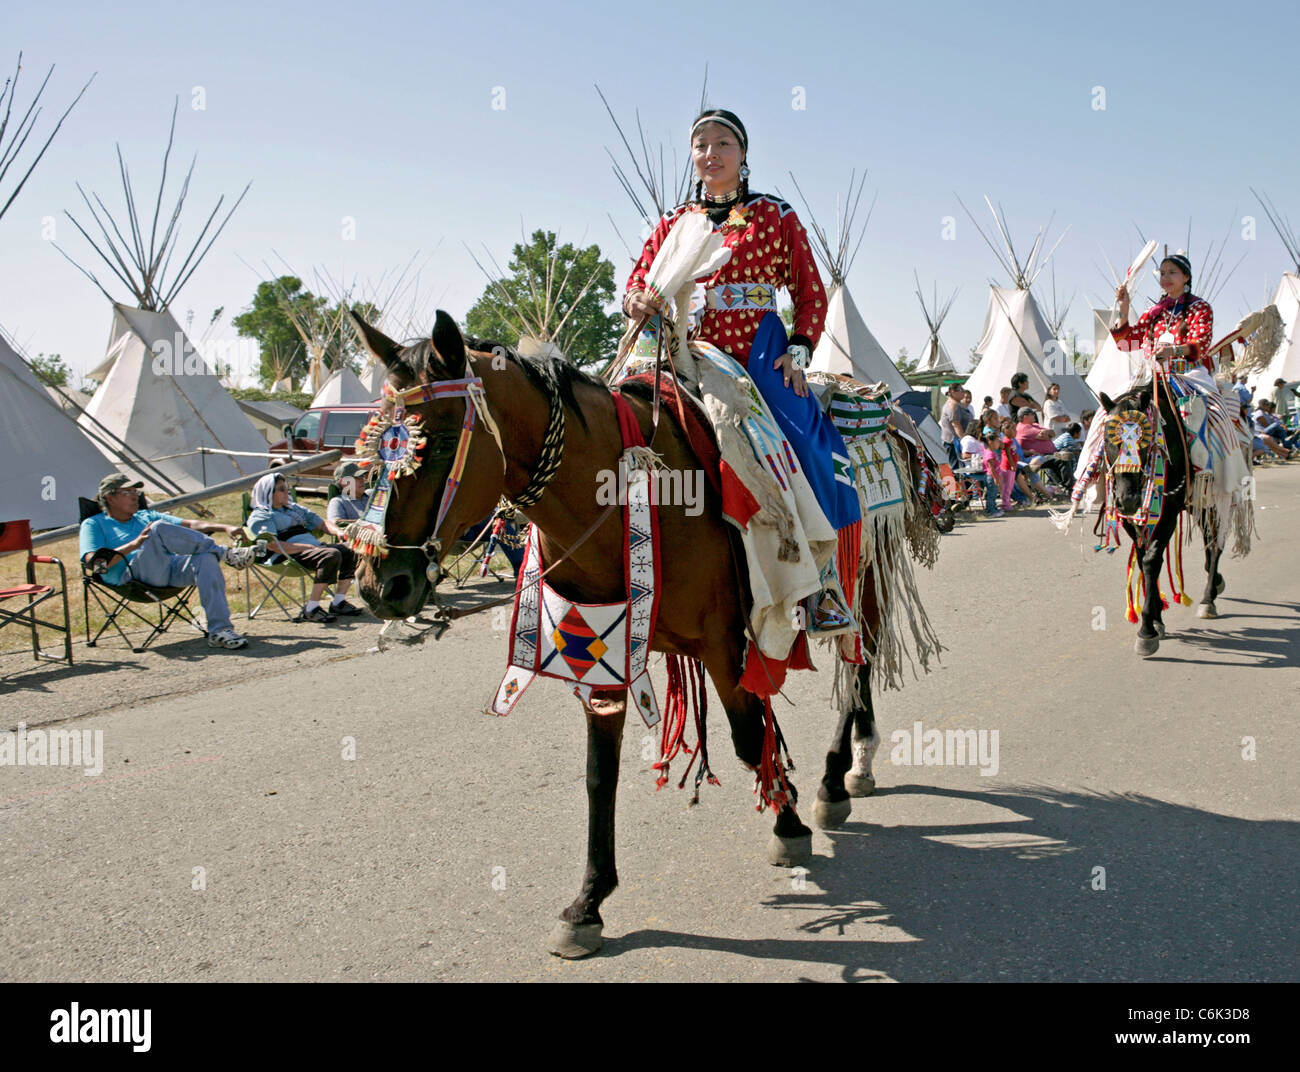 Parade held on the Crow Reservation during the annual Crow Fair held in